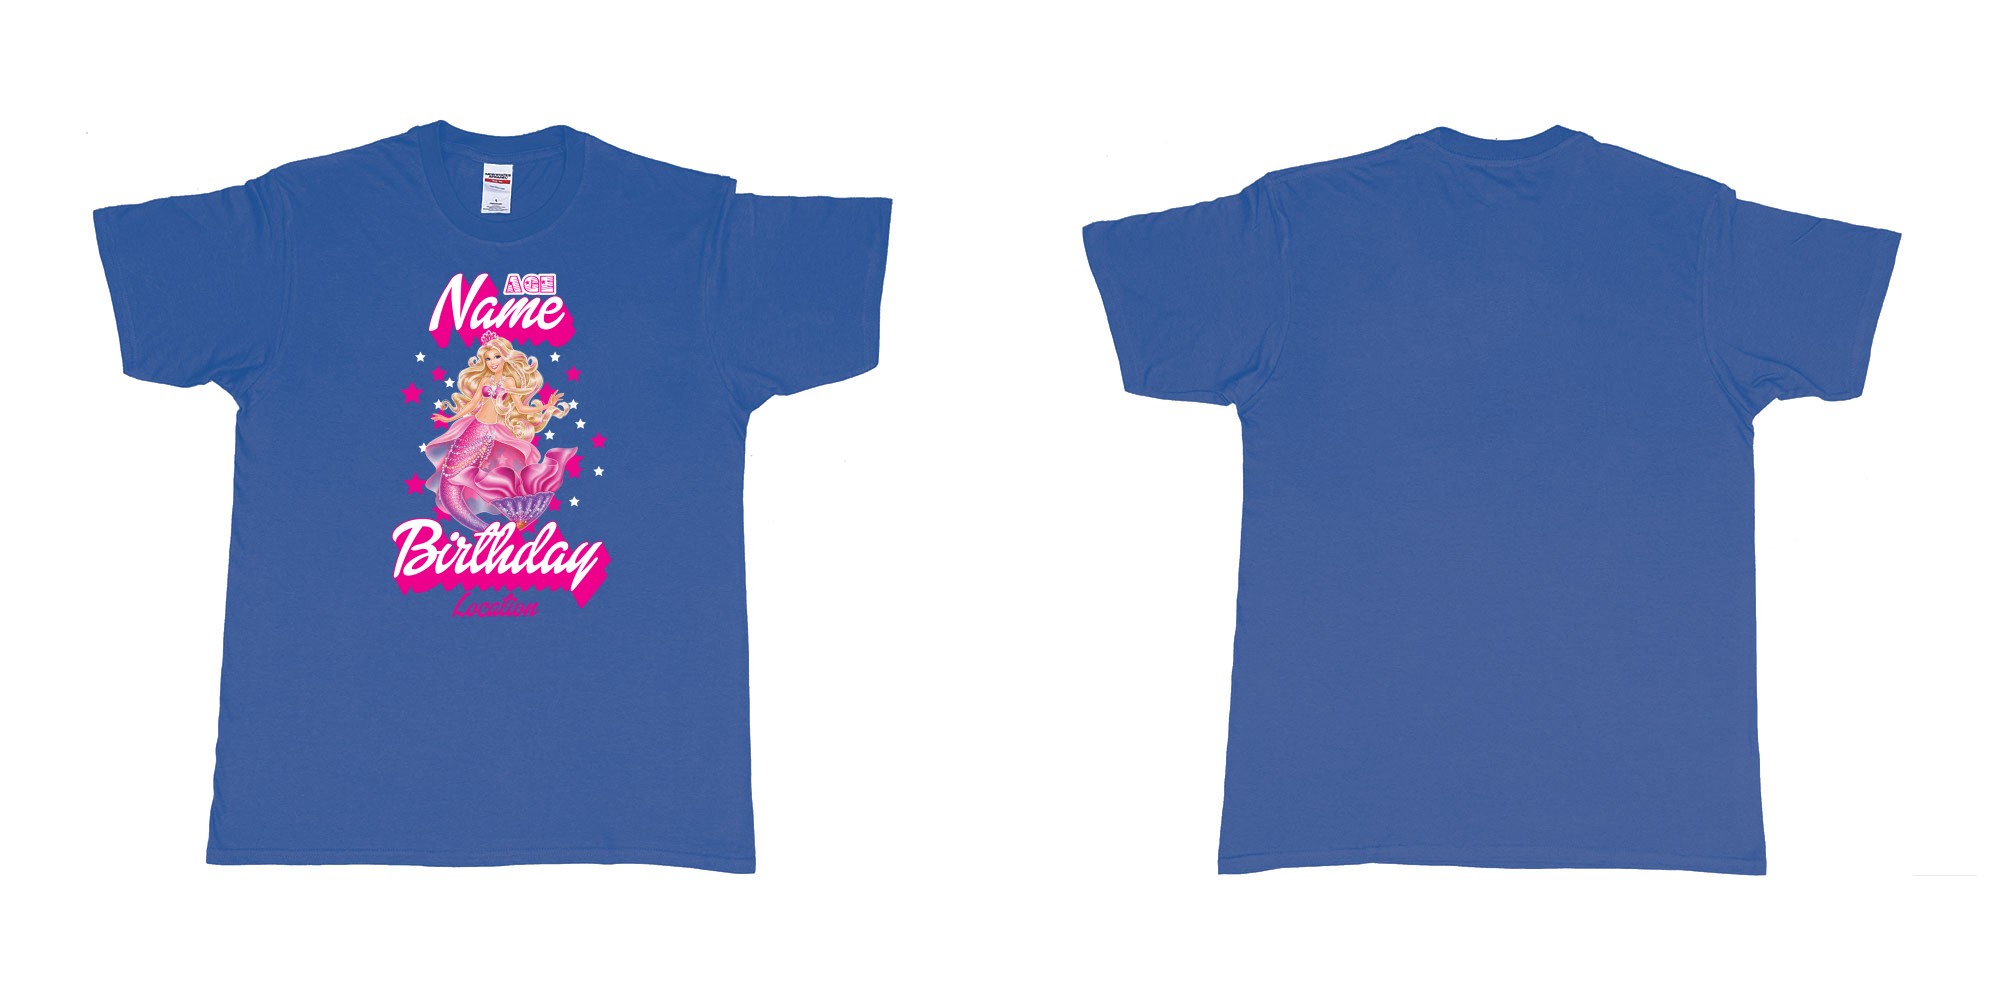 Custom tshirt design barbie mermaid custom name birthday in fabric color royal-blue choice your own text made in Bali by The Pirate Way